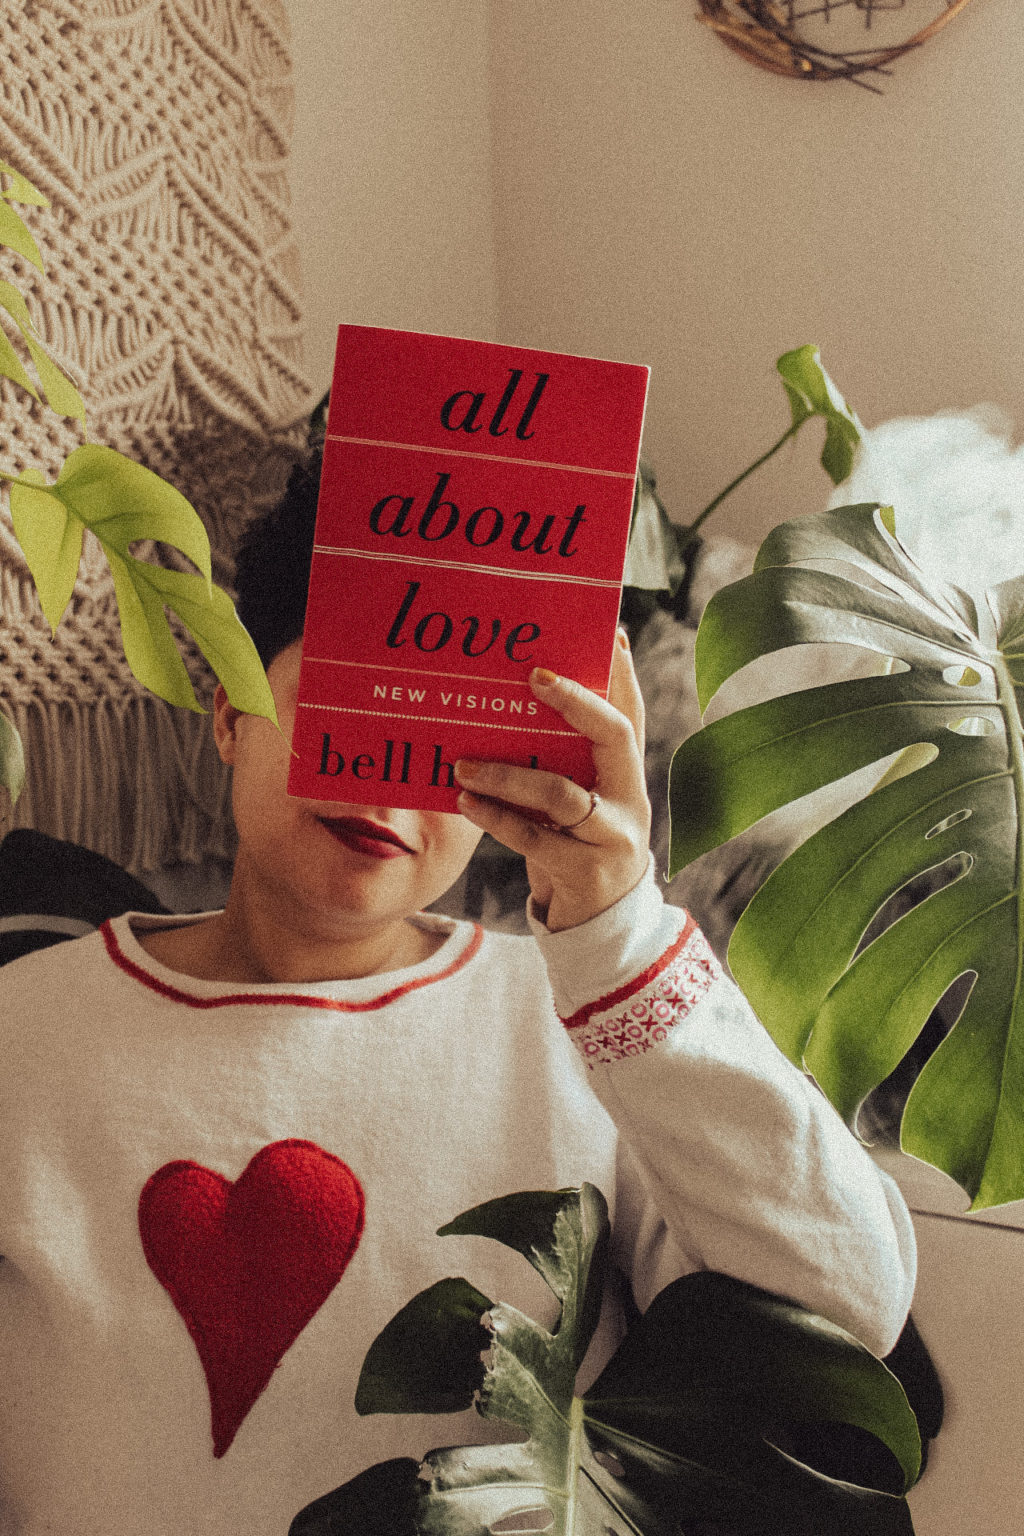 Emily (the author) holding up a copy of All About Love by Bell Hooks in front of her face, wearing a white sweater with a red heart on it. She is surrounded by some large leaves from her monstera deliciosa plants.